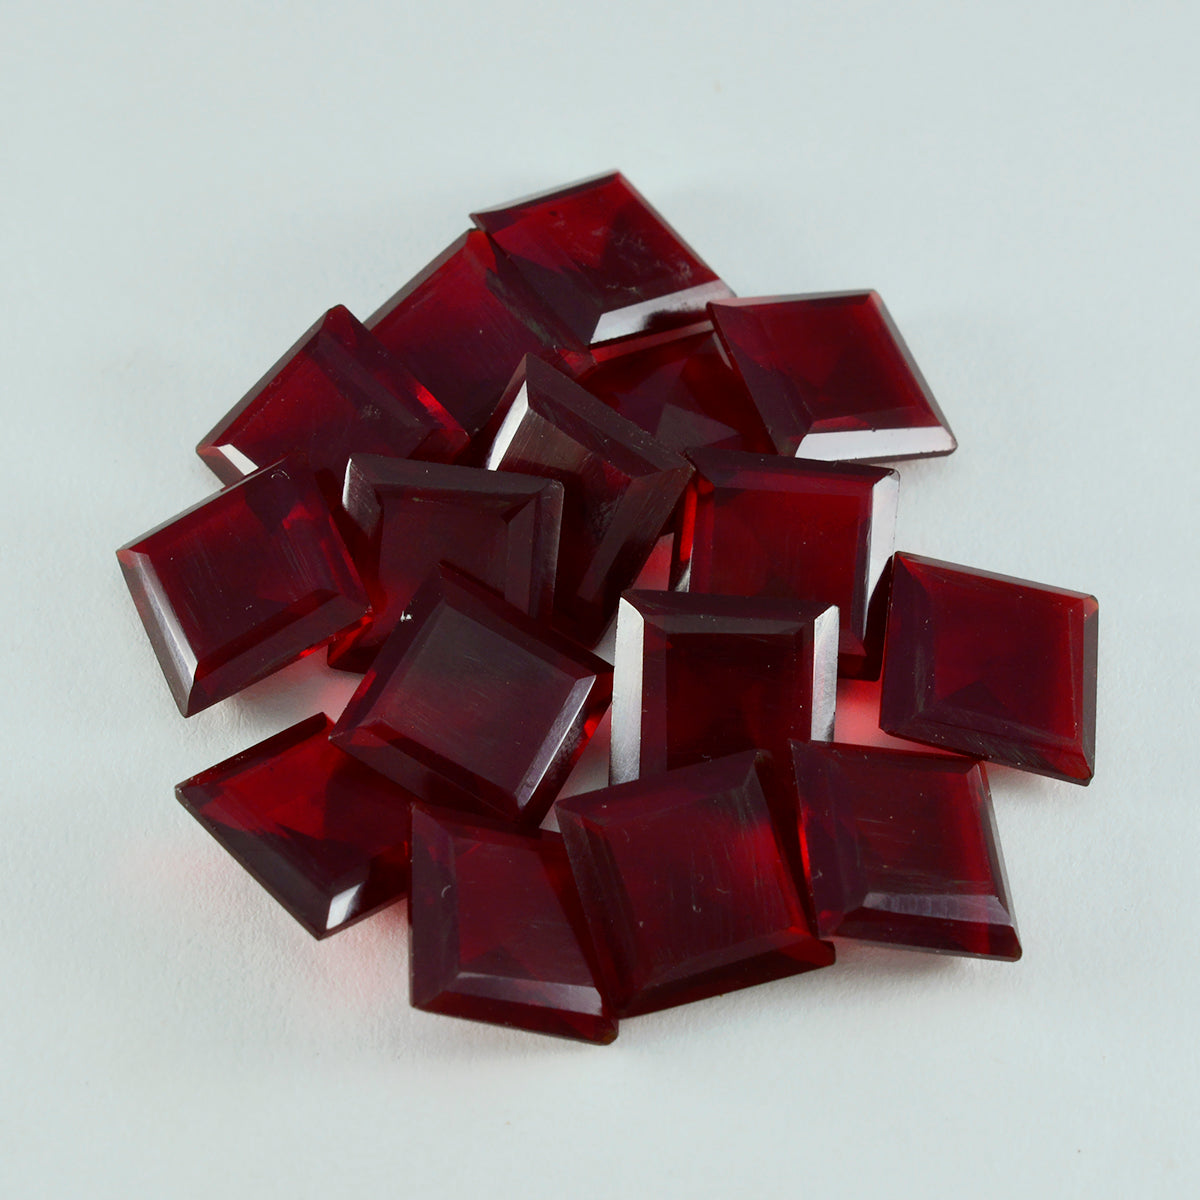 Riyogems 1PC Red Ruby CZ Faceted 12x12 mm Square Shape awesome Quality Loose Gemstone